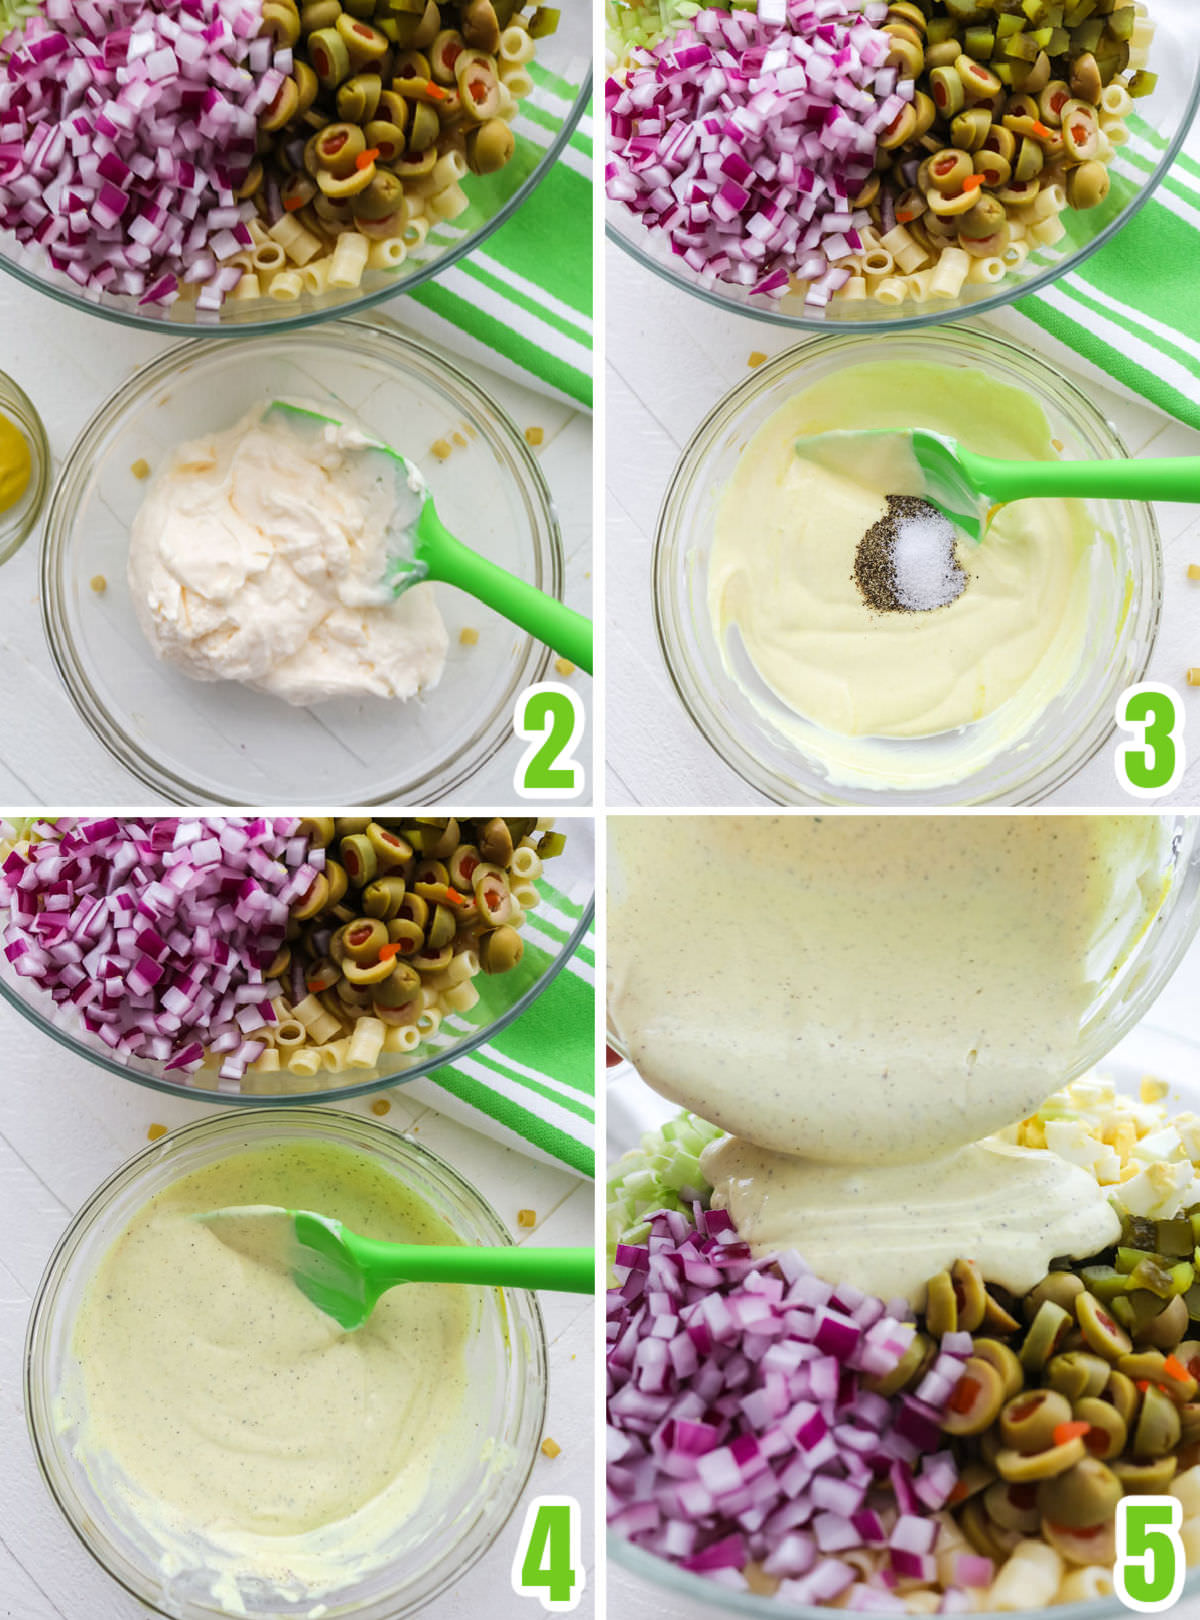 Collage image showing how to make the Macaroni Salad dressing.